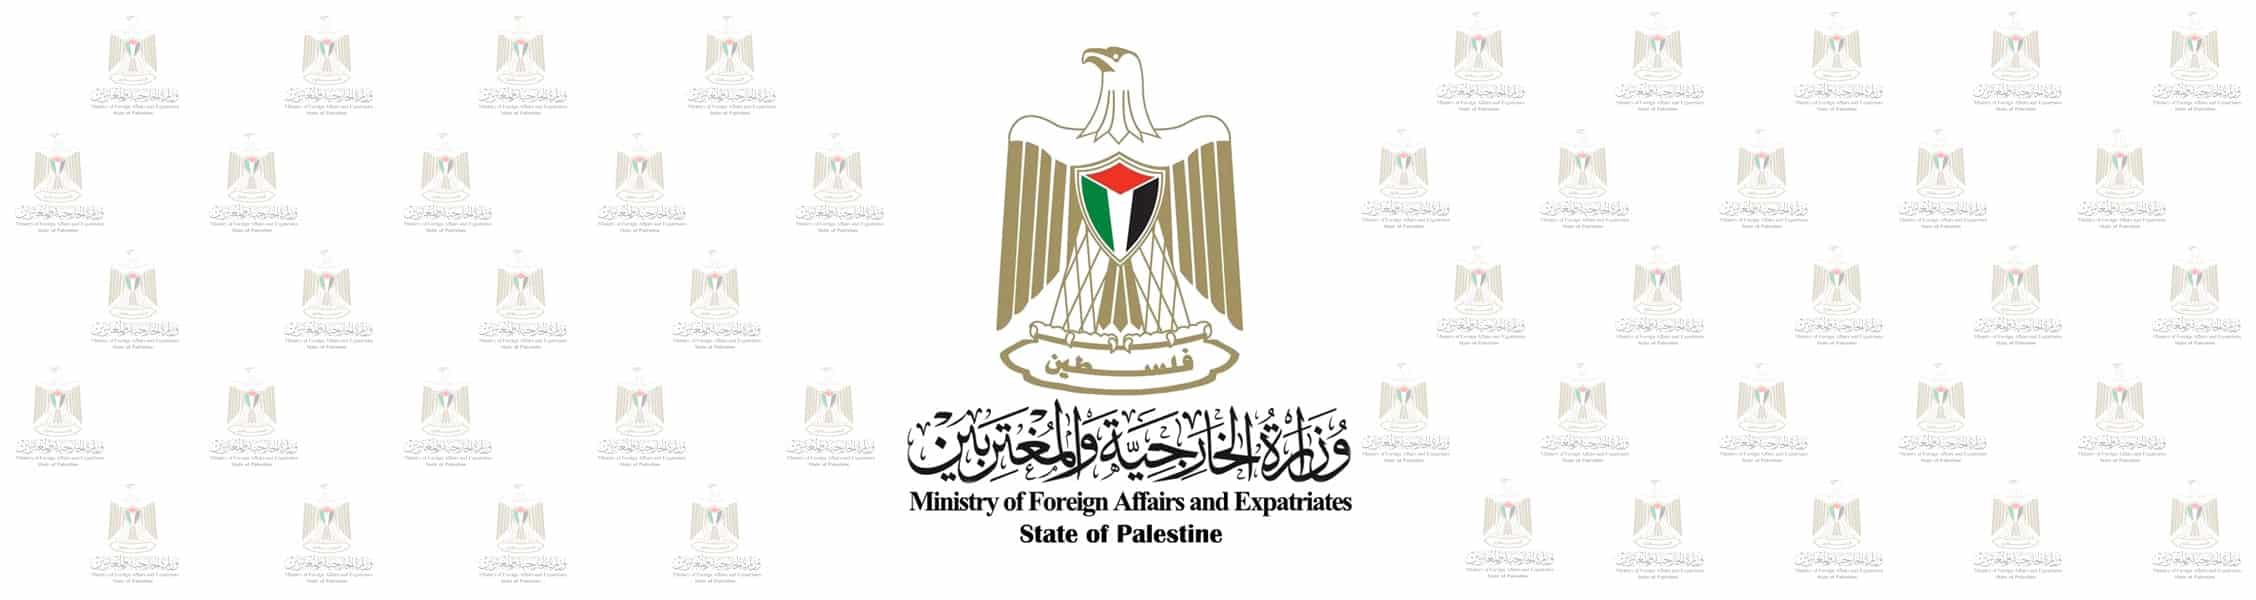 Foreign Minister Welcomes Issuance Of Database Of Companies Involved In Israeli Settlements 03